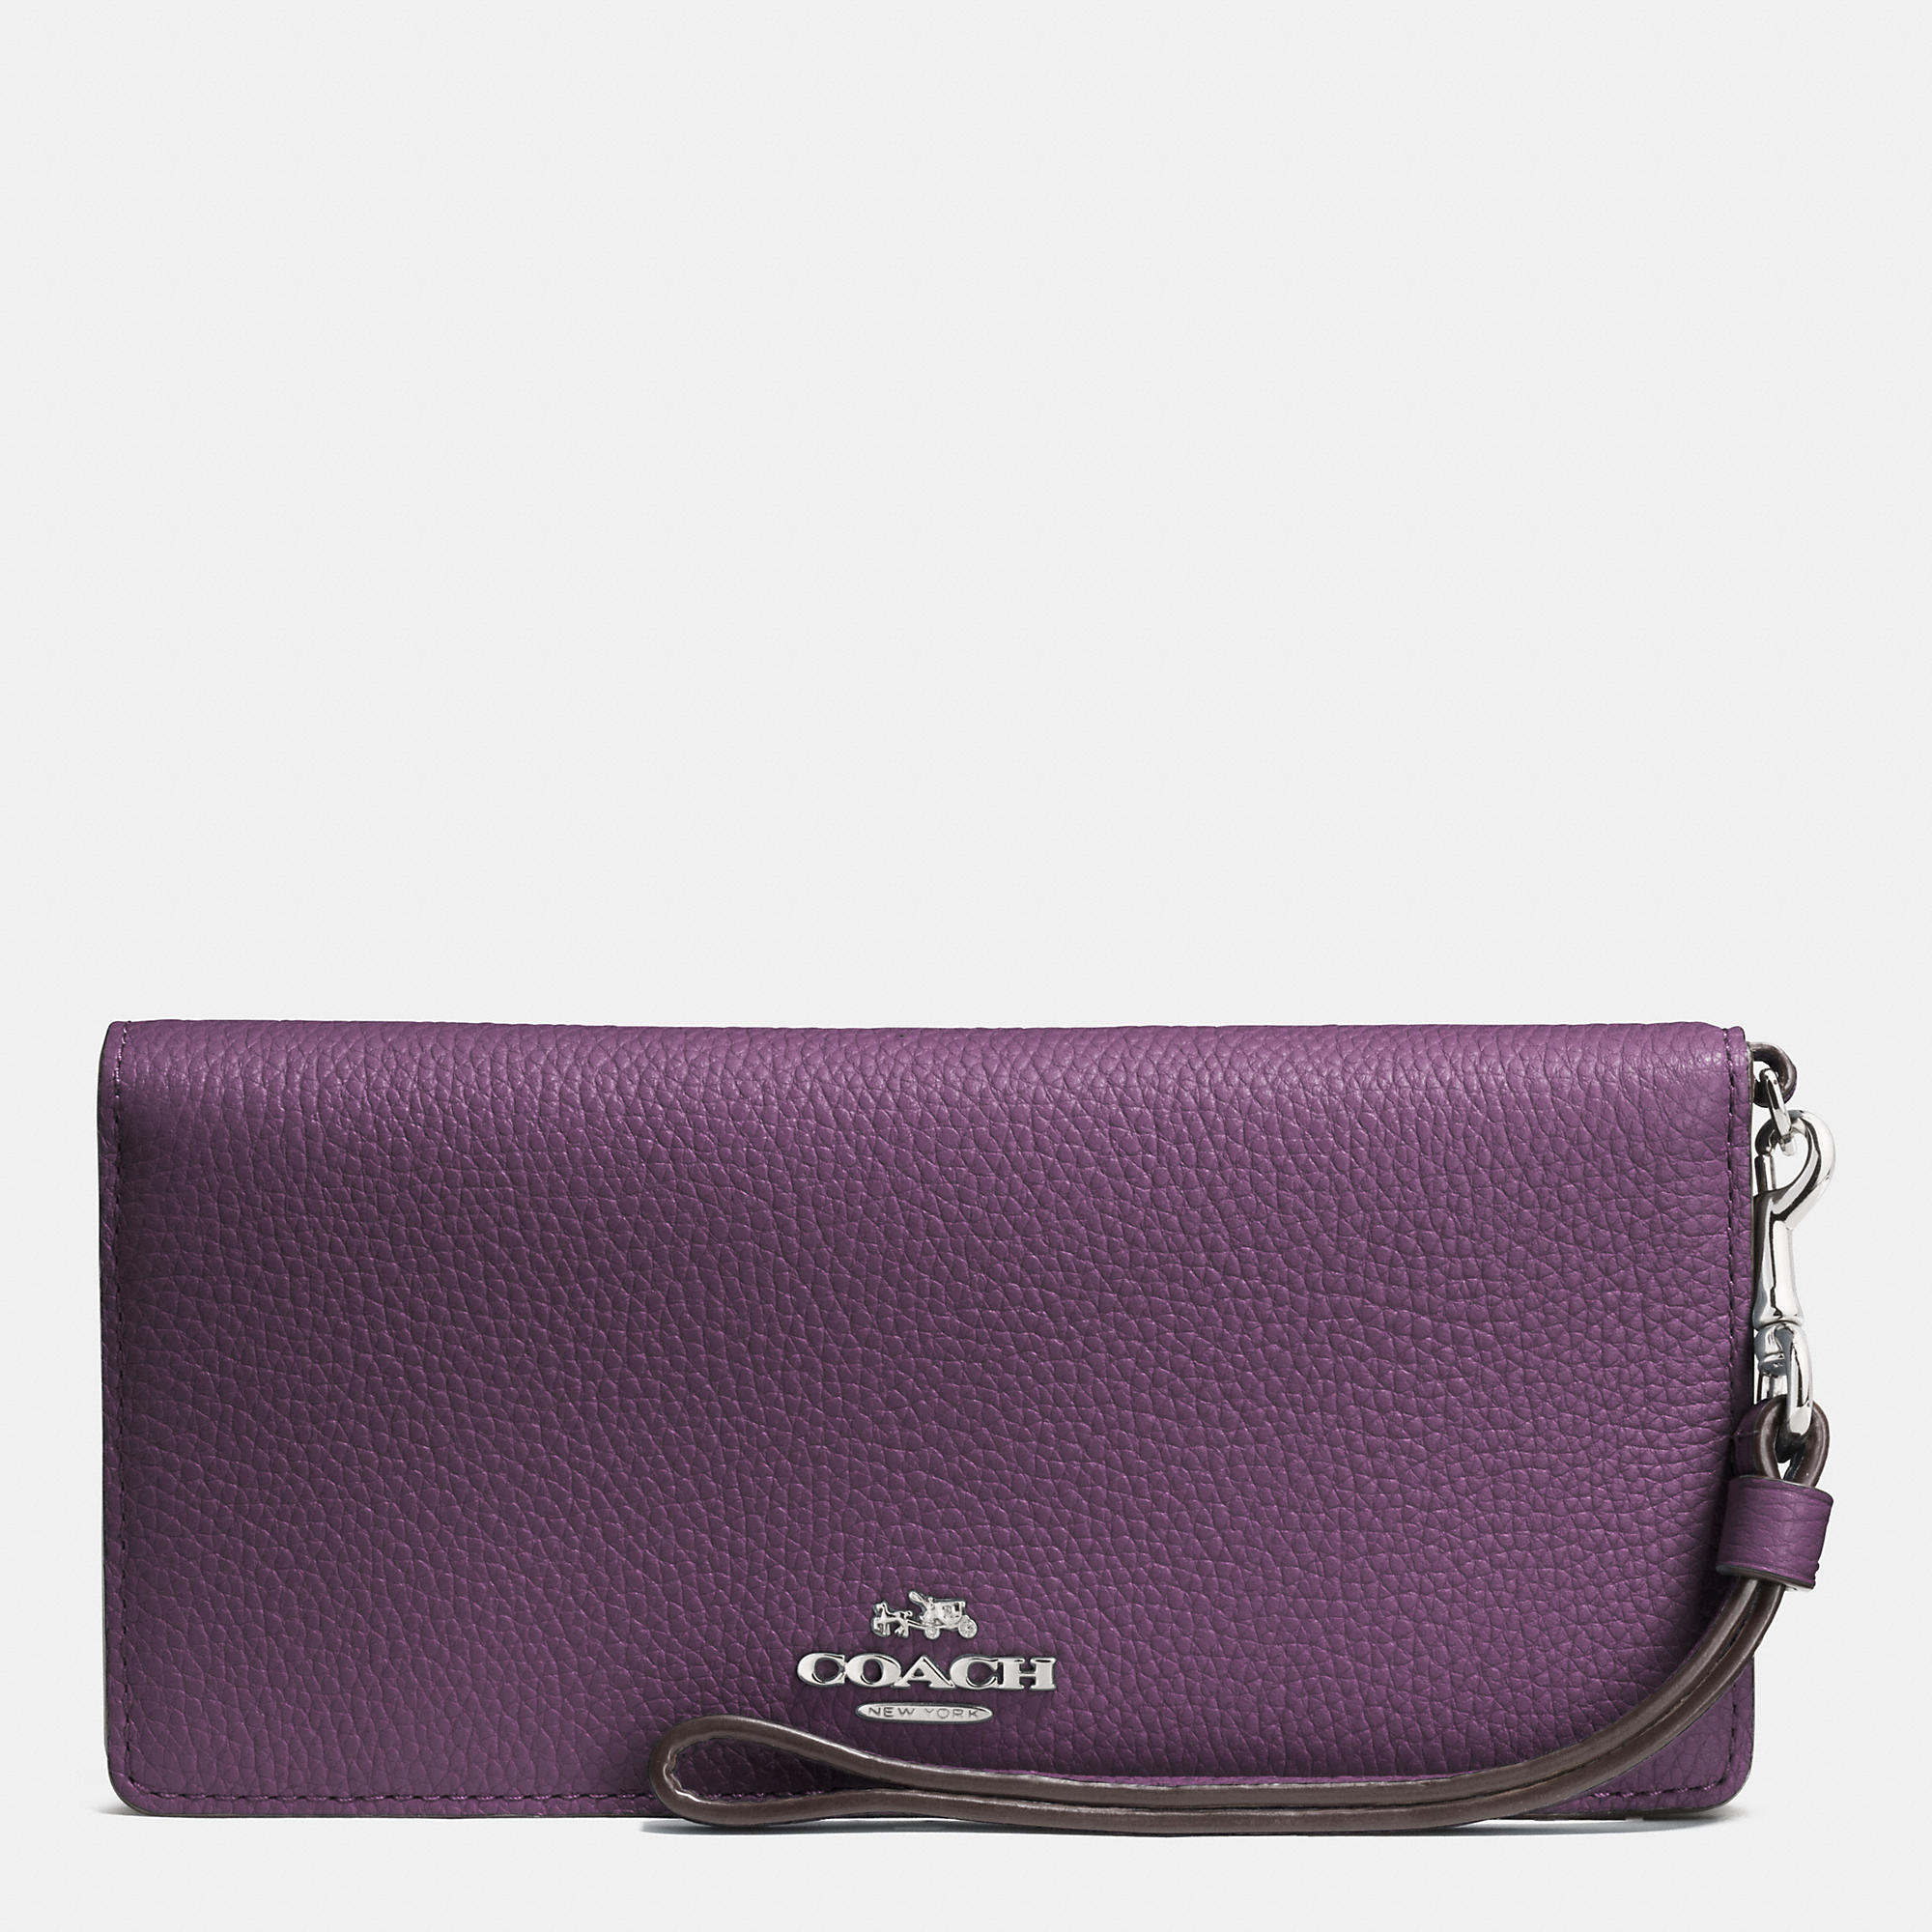 New Realer Coach Slim Wallet In Colorblock Leather